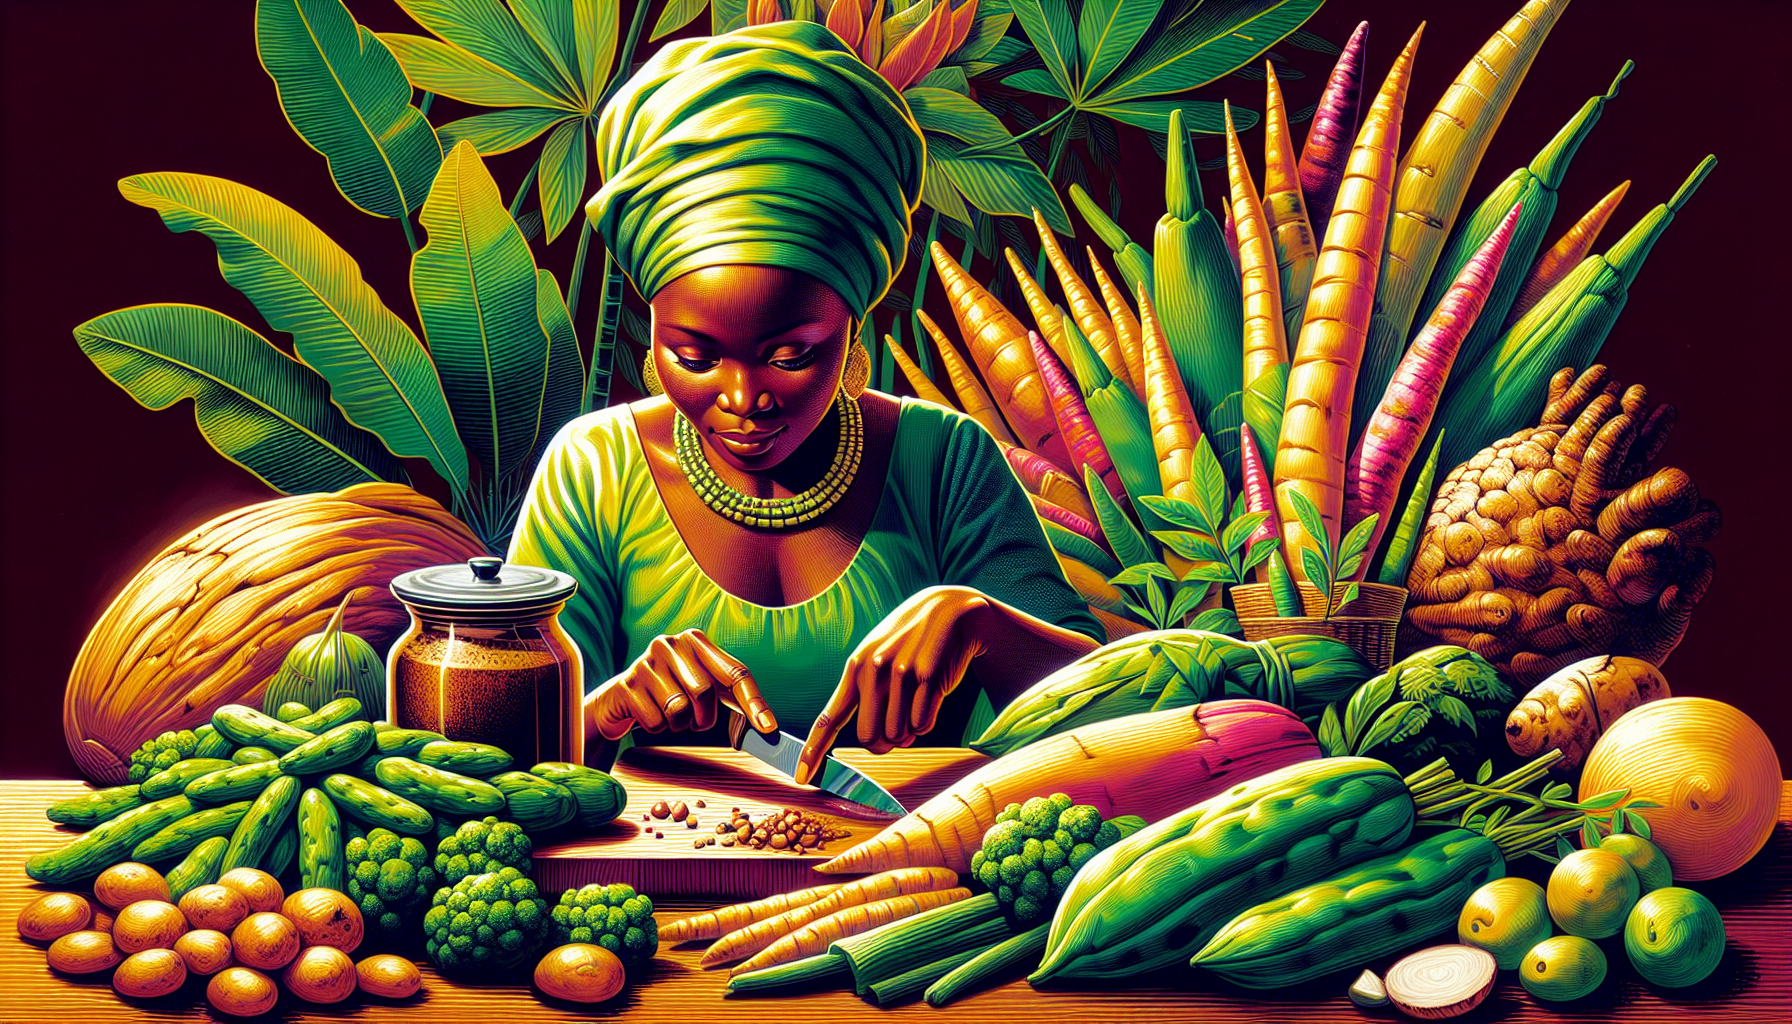 A captivating illustration of a woman preparing traditional Congolese vegetable dishes using fresh produce and traditional cooking methods